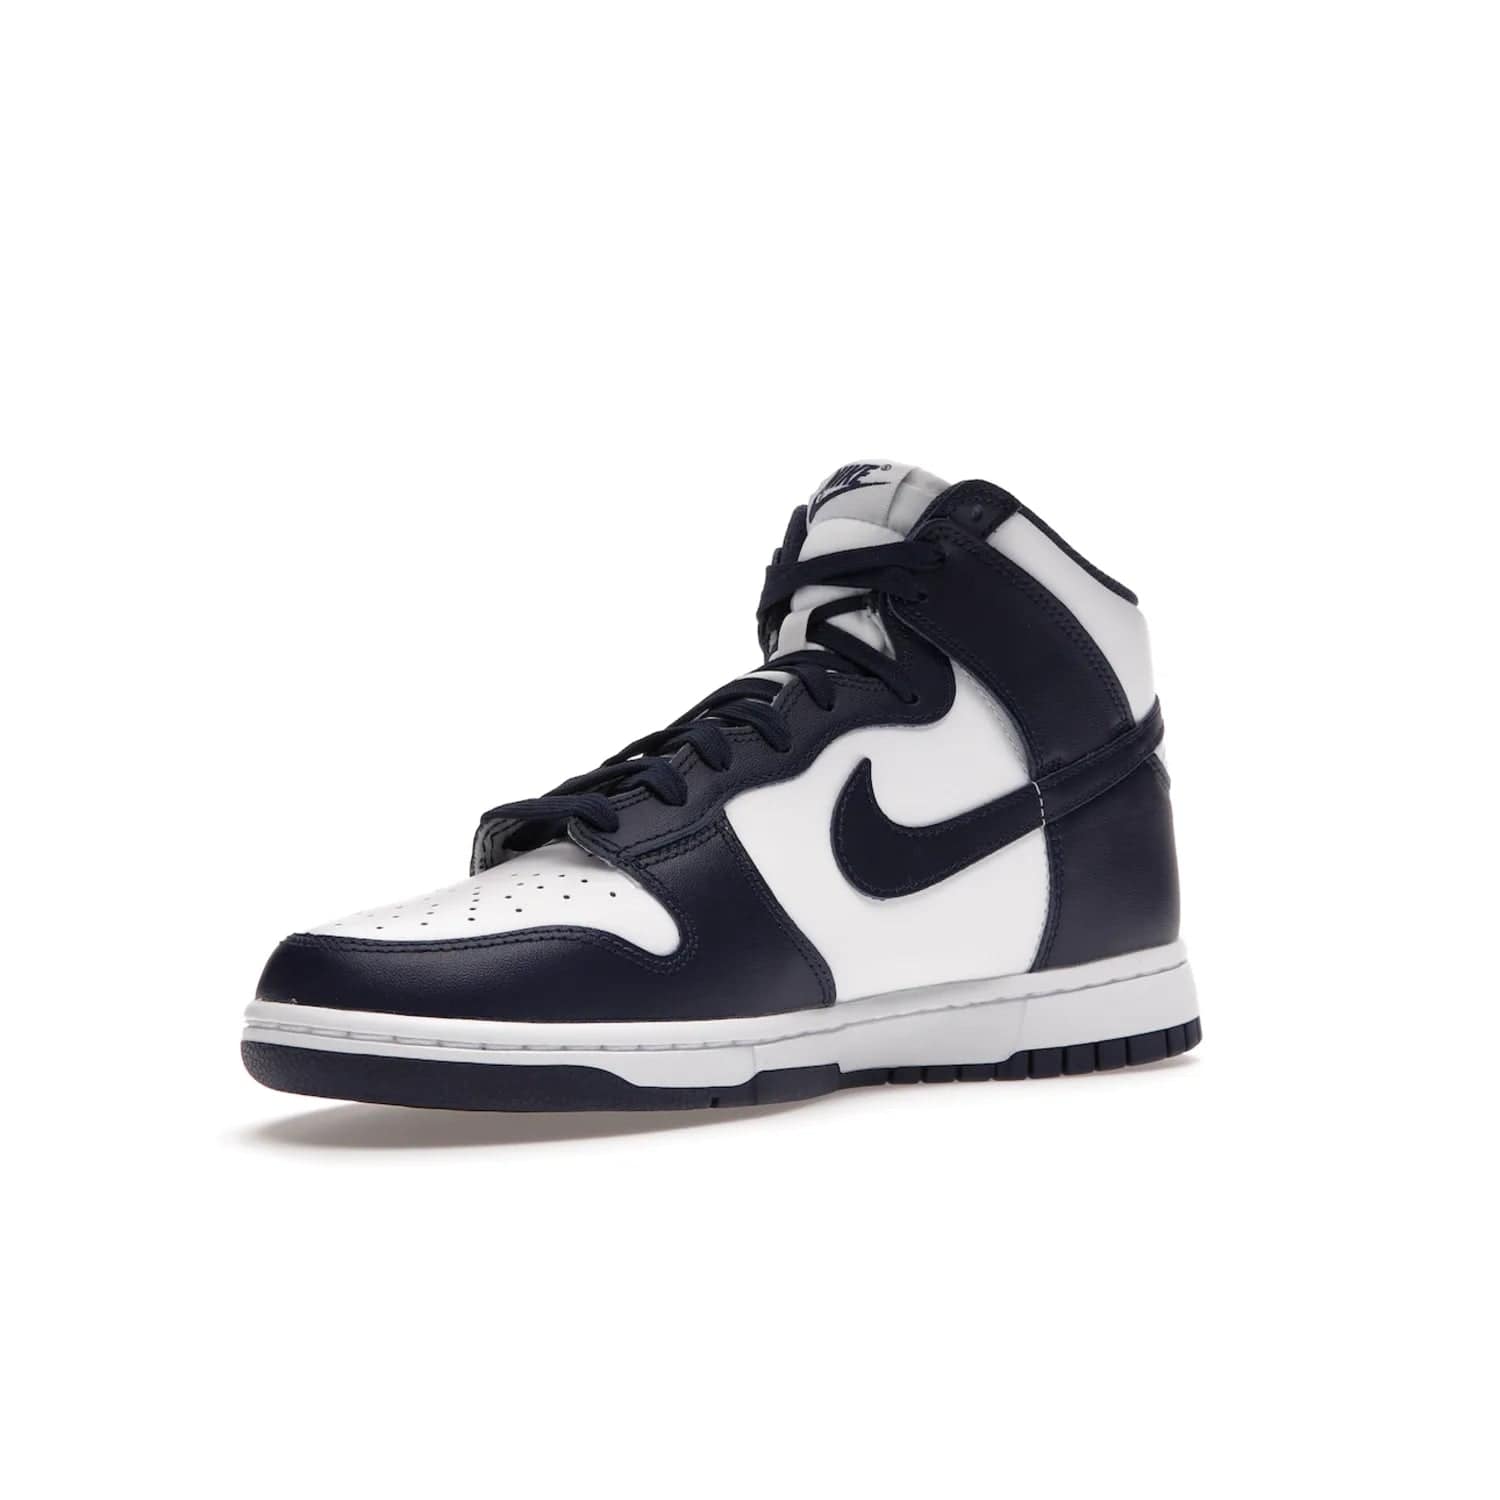 Nike Dunk High Championship Navy - Image 15 - Only at www.BallersClubKickz.com - Classic athletic style meets striking color-blocking on the Nike Dunk High Championship Navy. A white leather upper with Championship Navy overlays creates a retro look with a woven tongue label and sole. Unleash your inner champion with the Nike Dunk High Championship Navy.